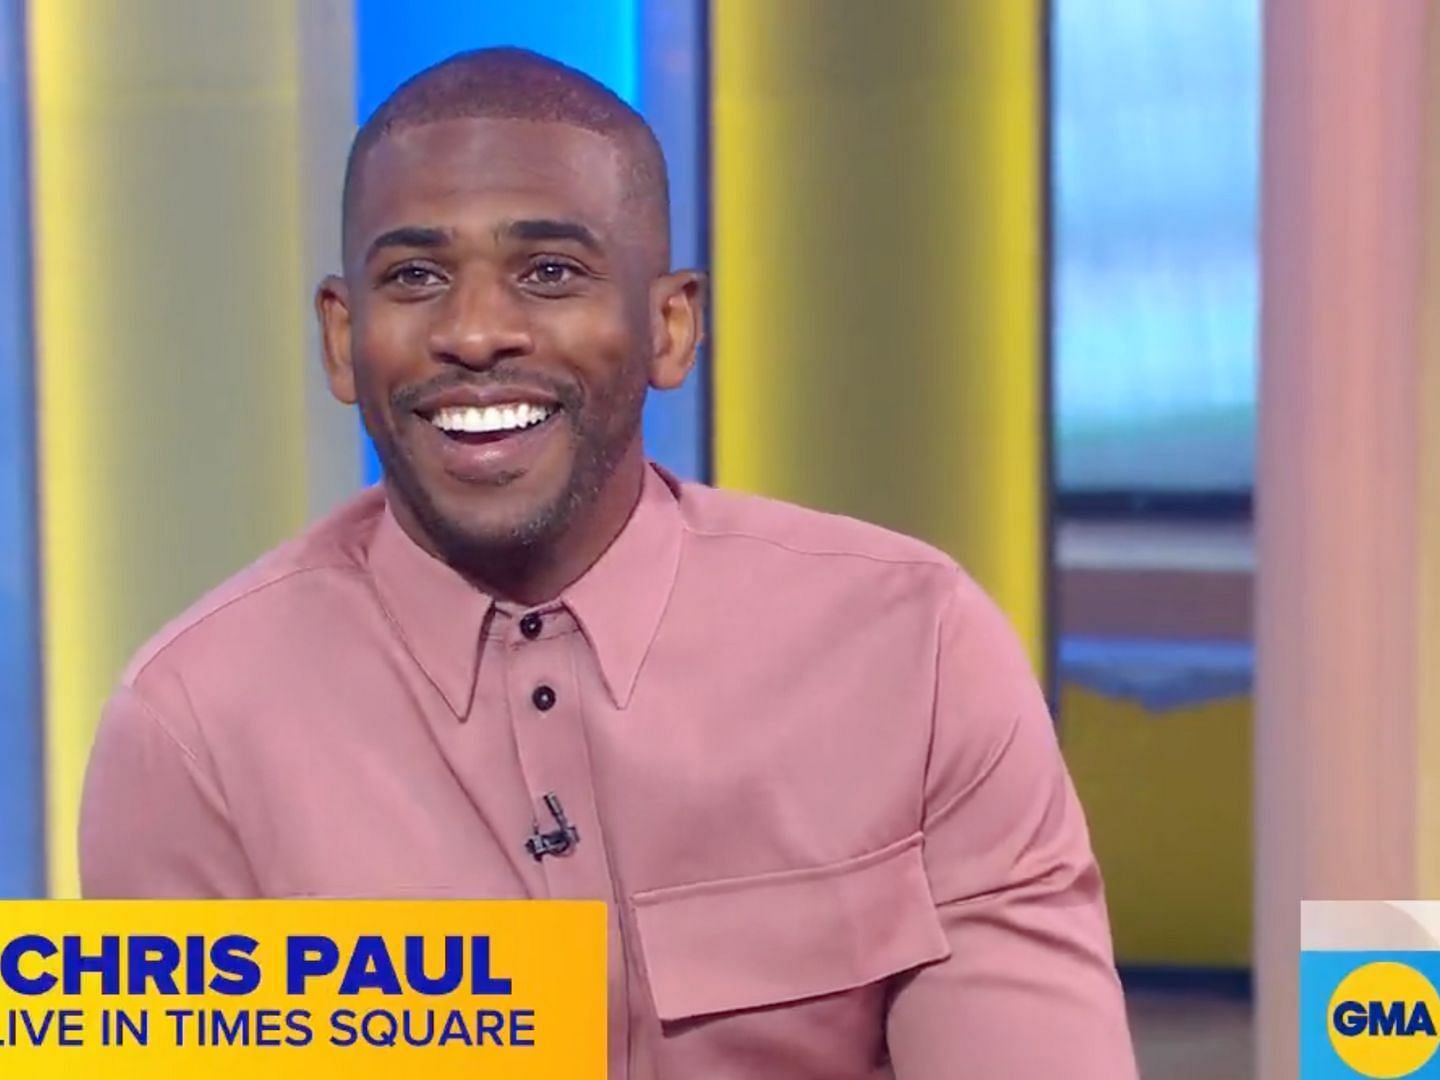 Chris Paul reveals he found out about Suns trading him on a plane to New York